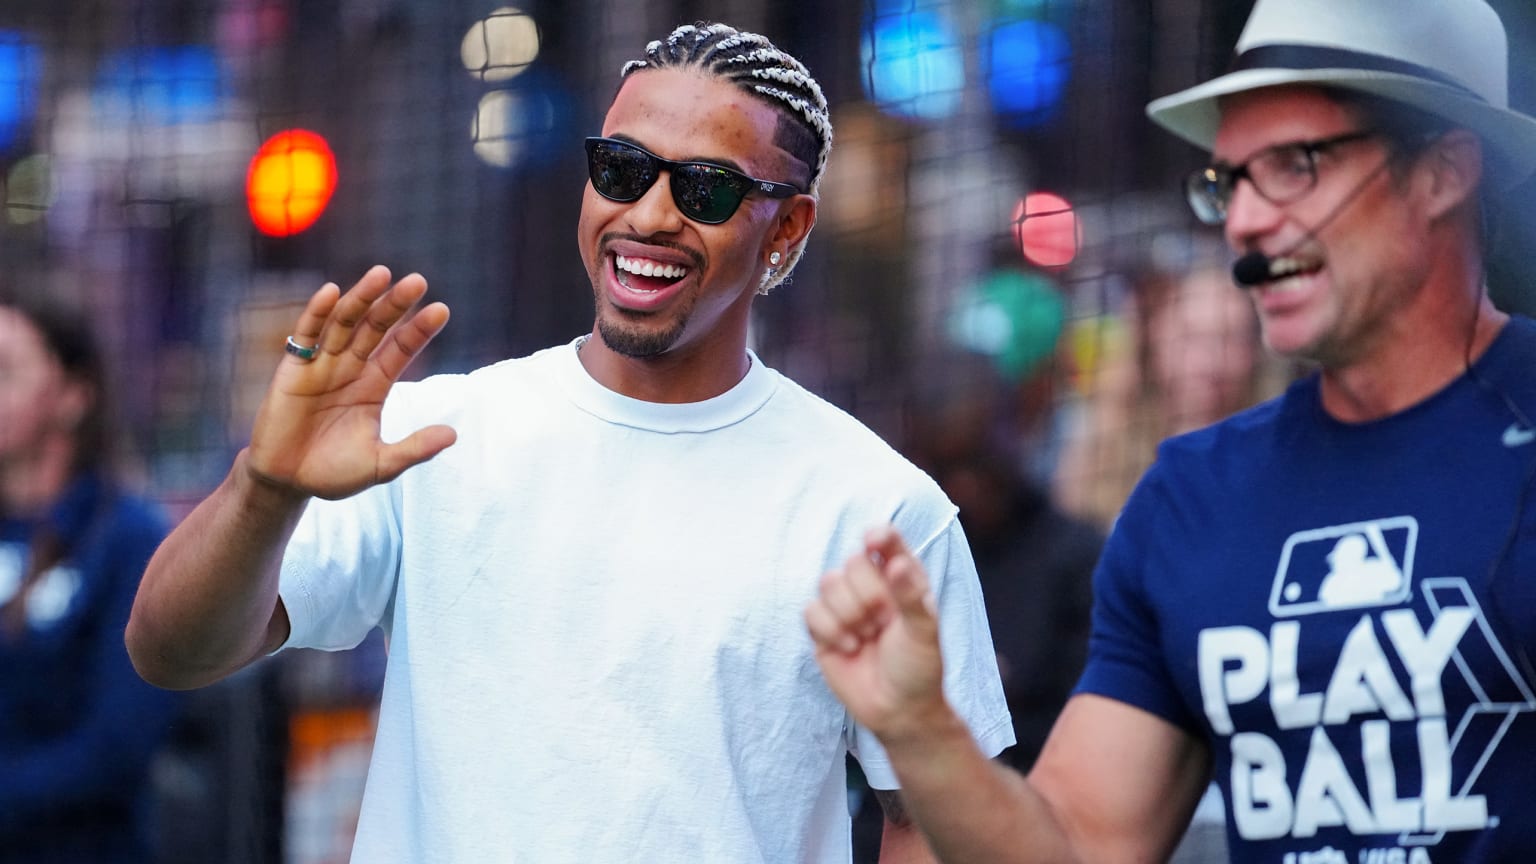 Francisco Lindor at PLAY BALL event in New York